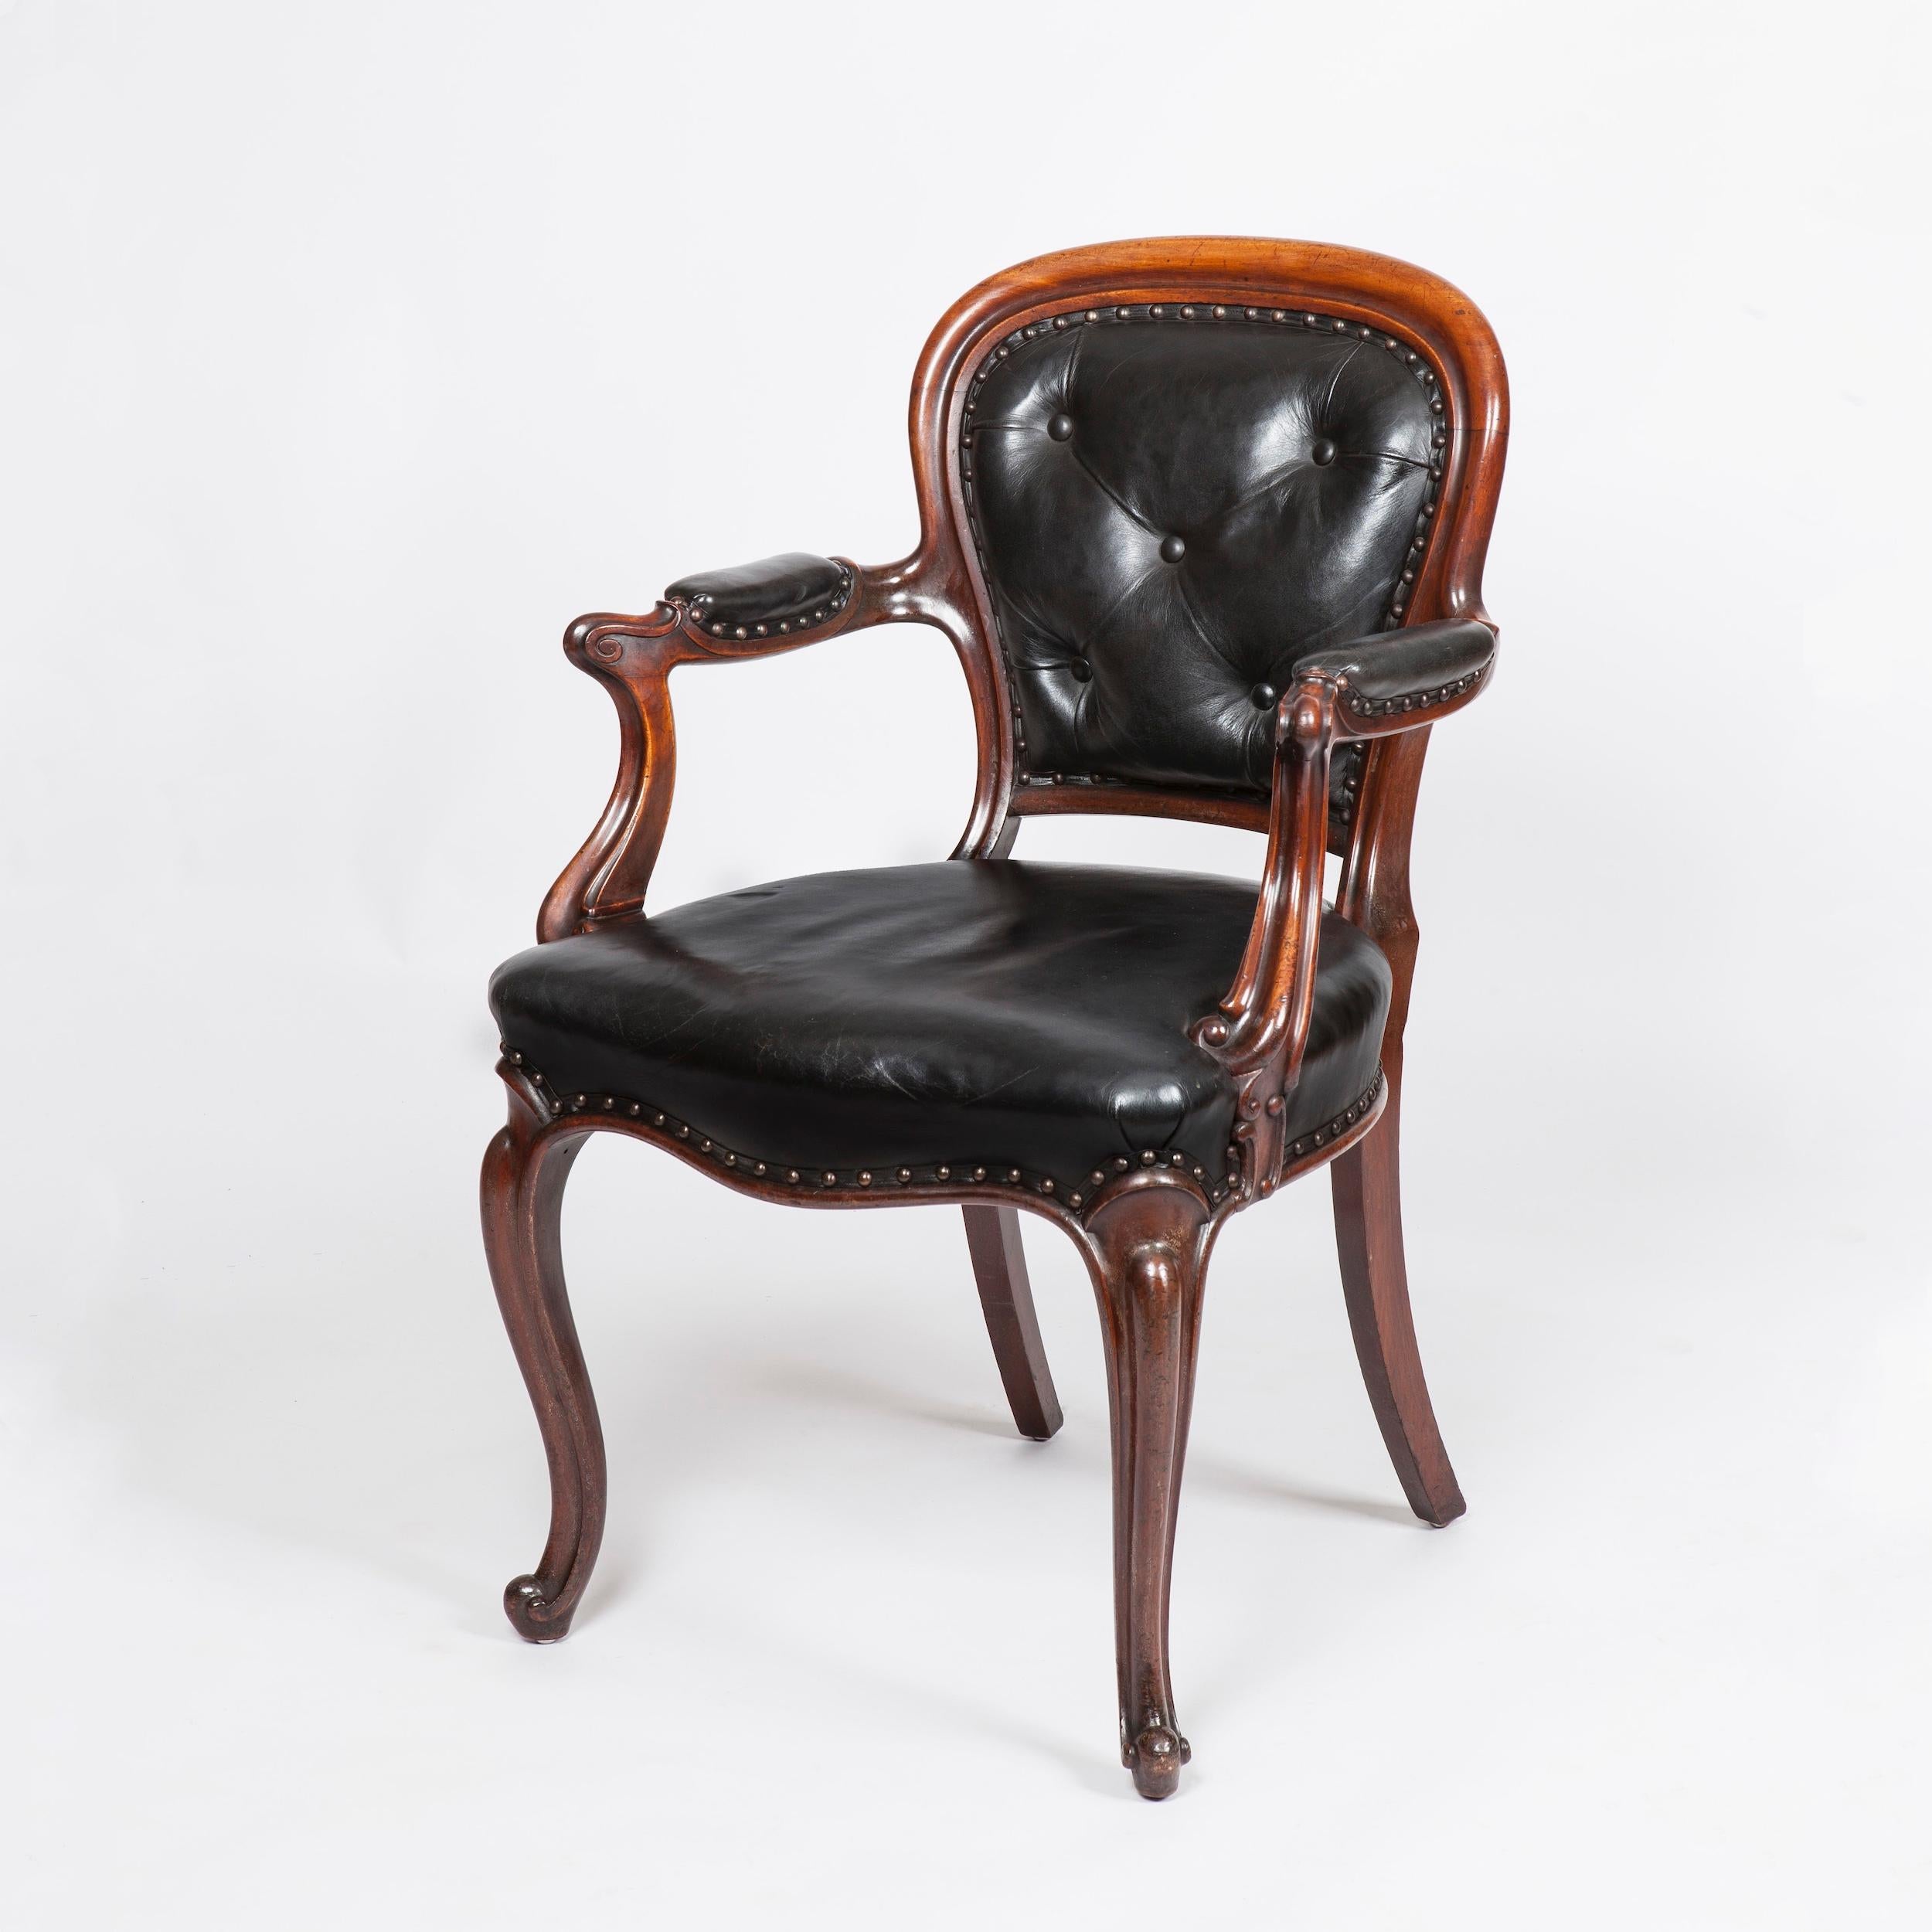 English Rare Set of 22 Nineteenth Century Antique Dining Chairs with Leather Upholstery For Sale